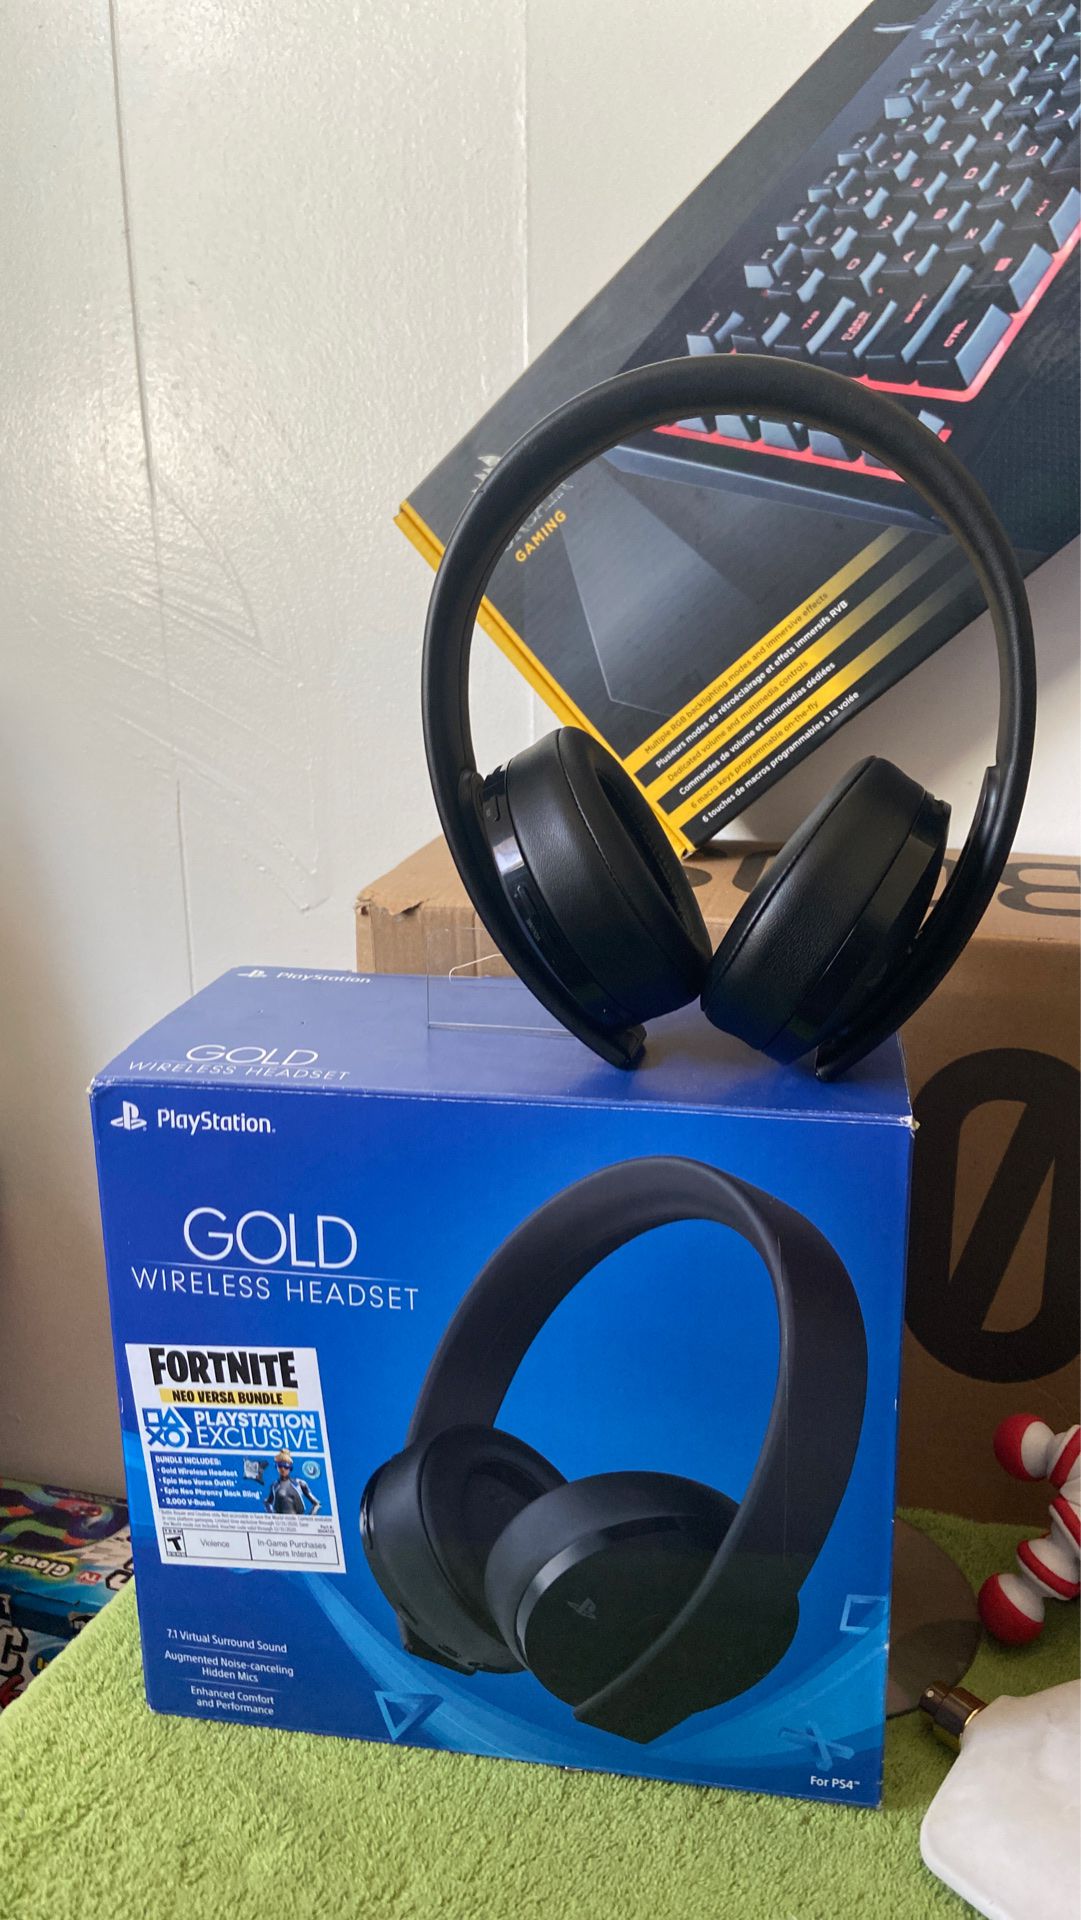 Gold wireless headset PlayStation